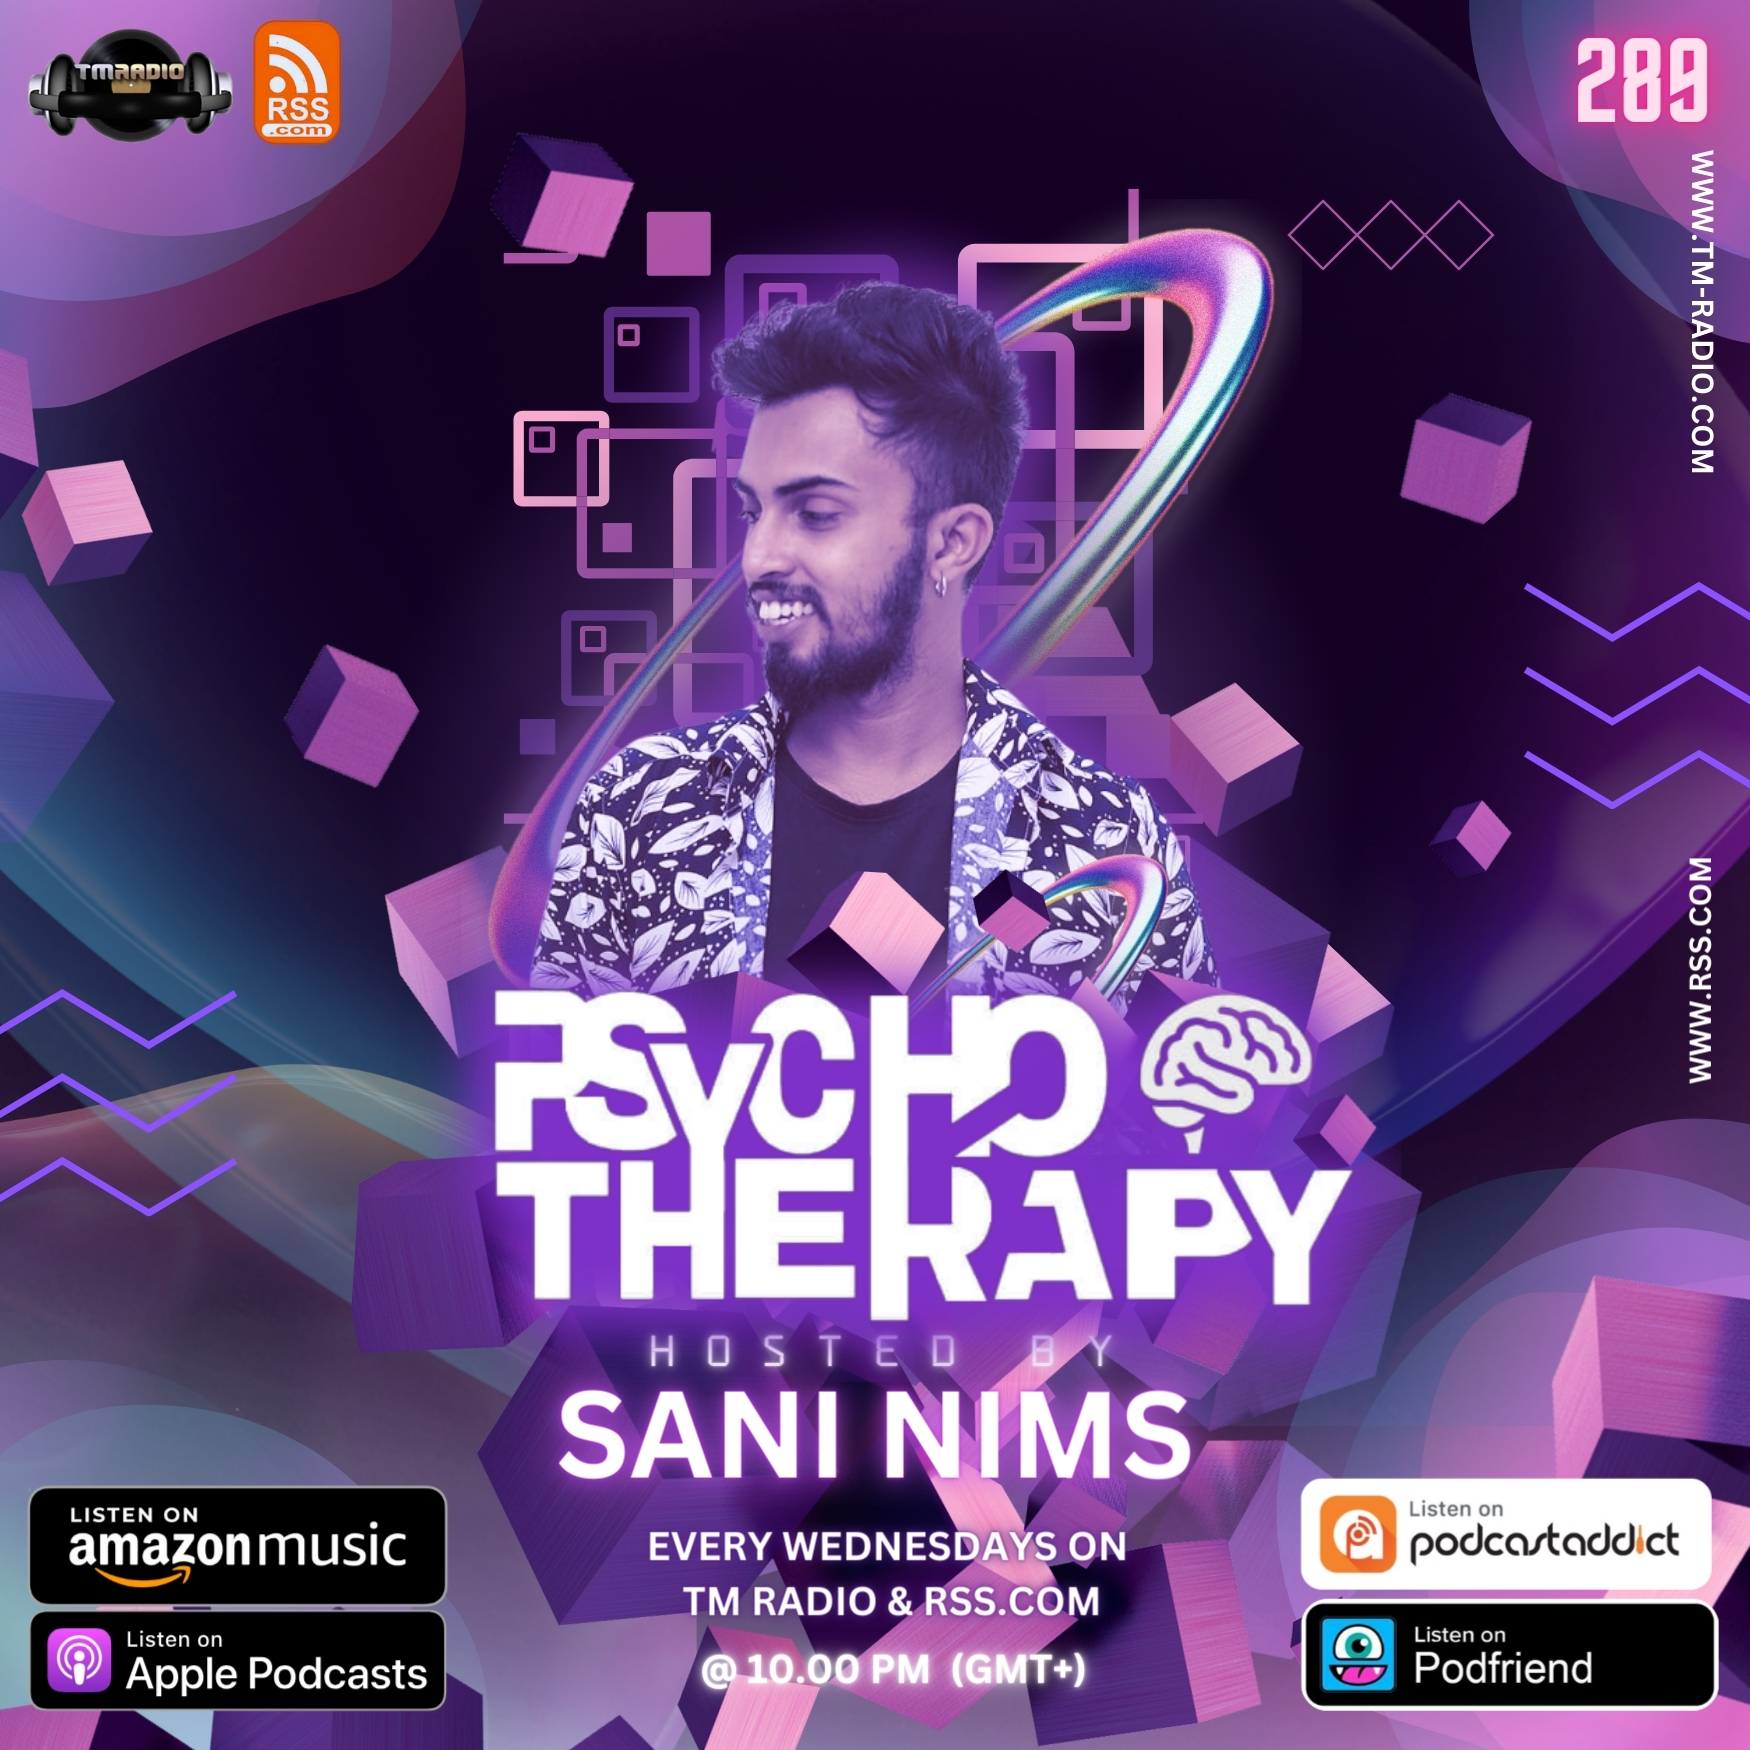 PSYCHO THERAPY EP 289 BY SANI NIMS ON TM RADIO (from May 1st)